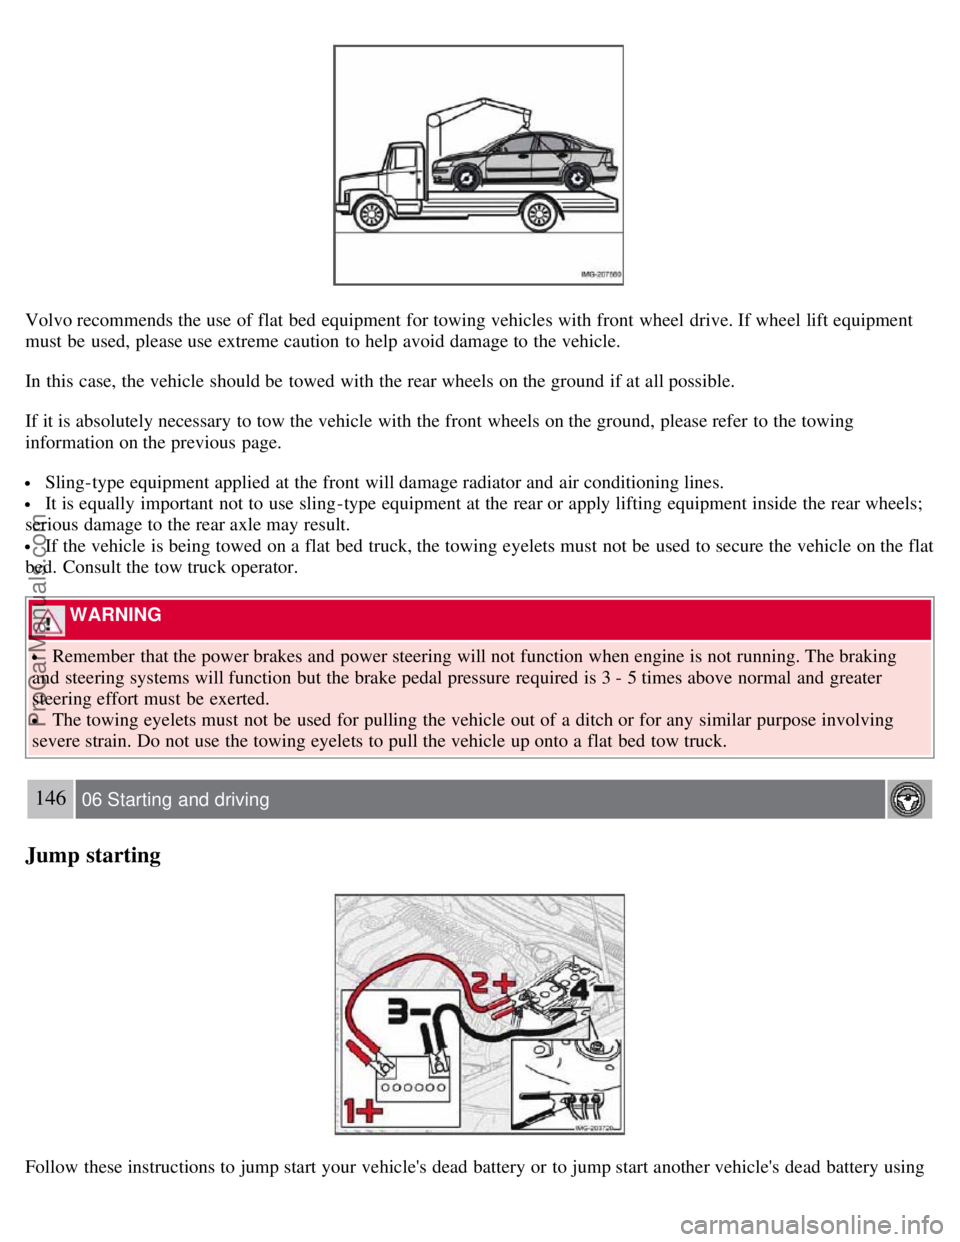 VOLVO S40 2007  Owners Manual Volvo recommends the use of flat bed  equipment for towing vehicles with front  wheel drive. If wheel lift equipment
must  be  used, please use extreme caution  to help avoid damage to the vehicle.
In